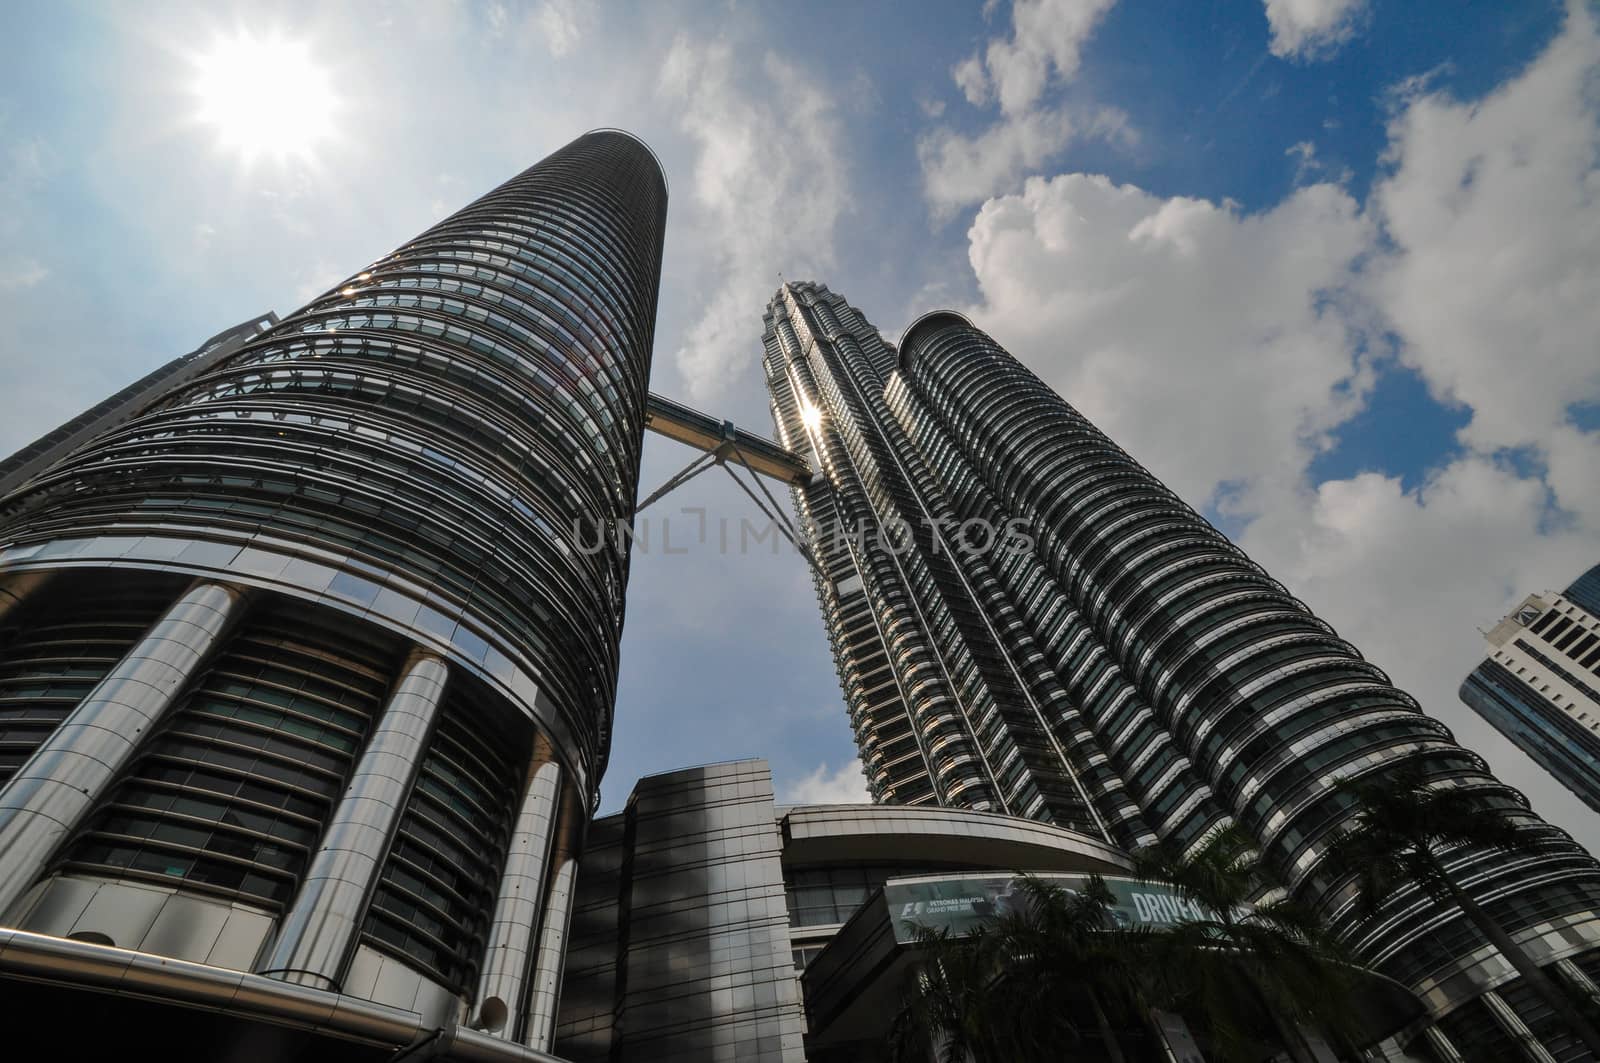 KUALA LUMPUR - APRIL 10: General view of Petronas Twin Towers on Apr 10, 2011 in Kuala Lumpur, Malaysia. The towers are the worlds tallest twin towers with the height of 451.9m.